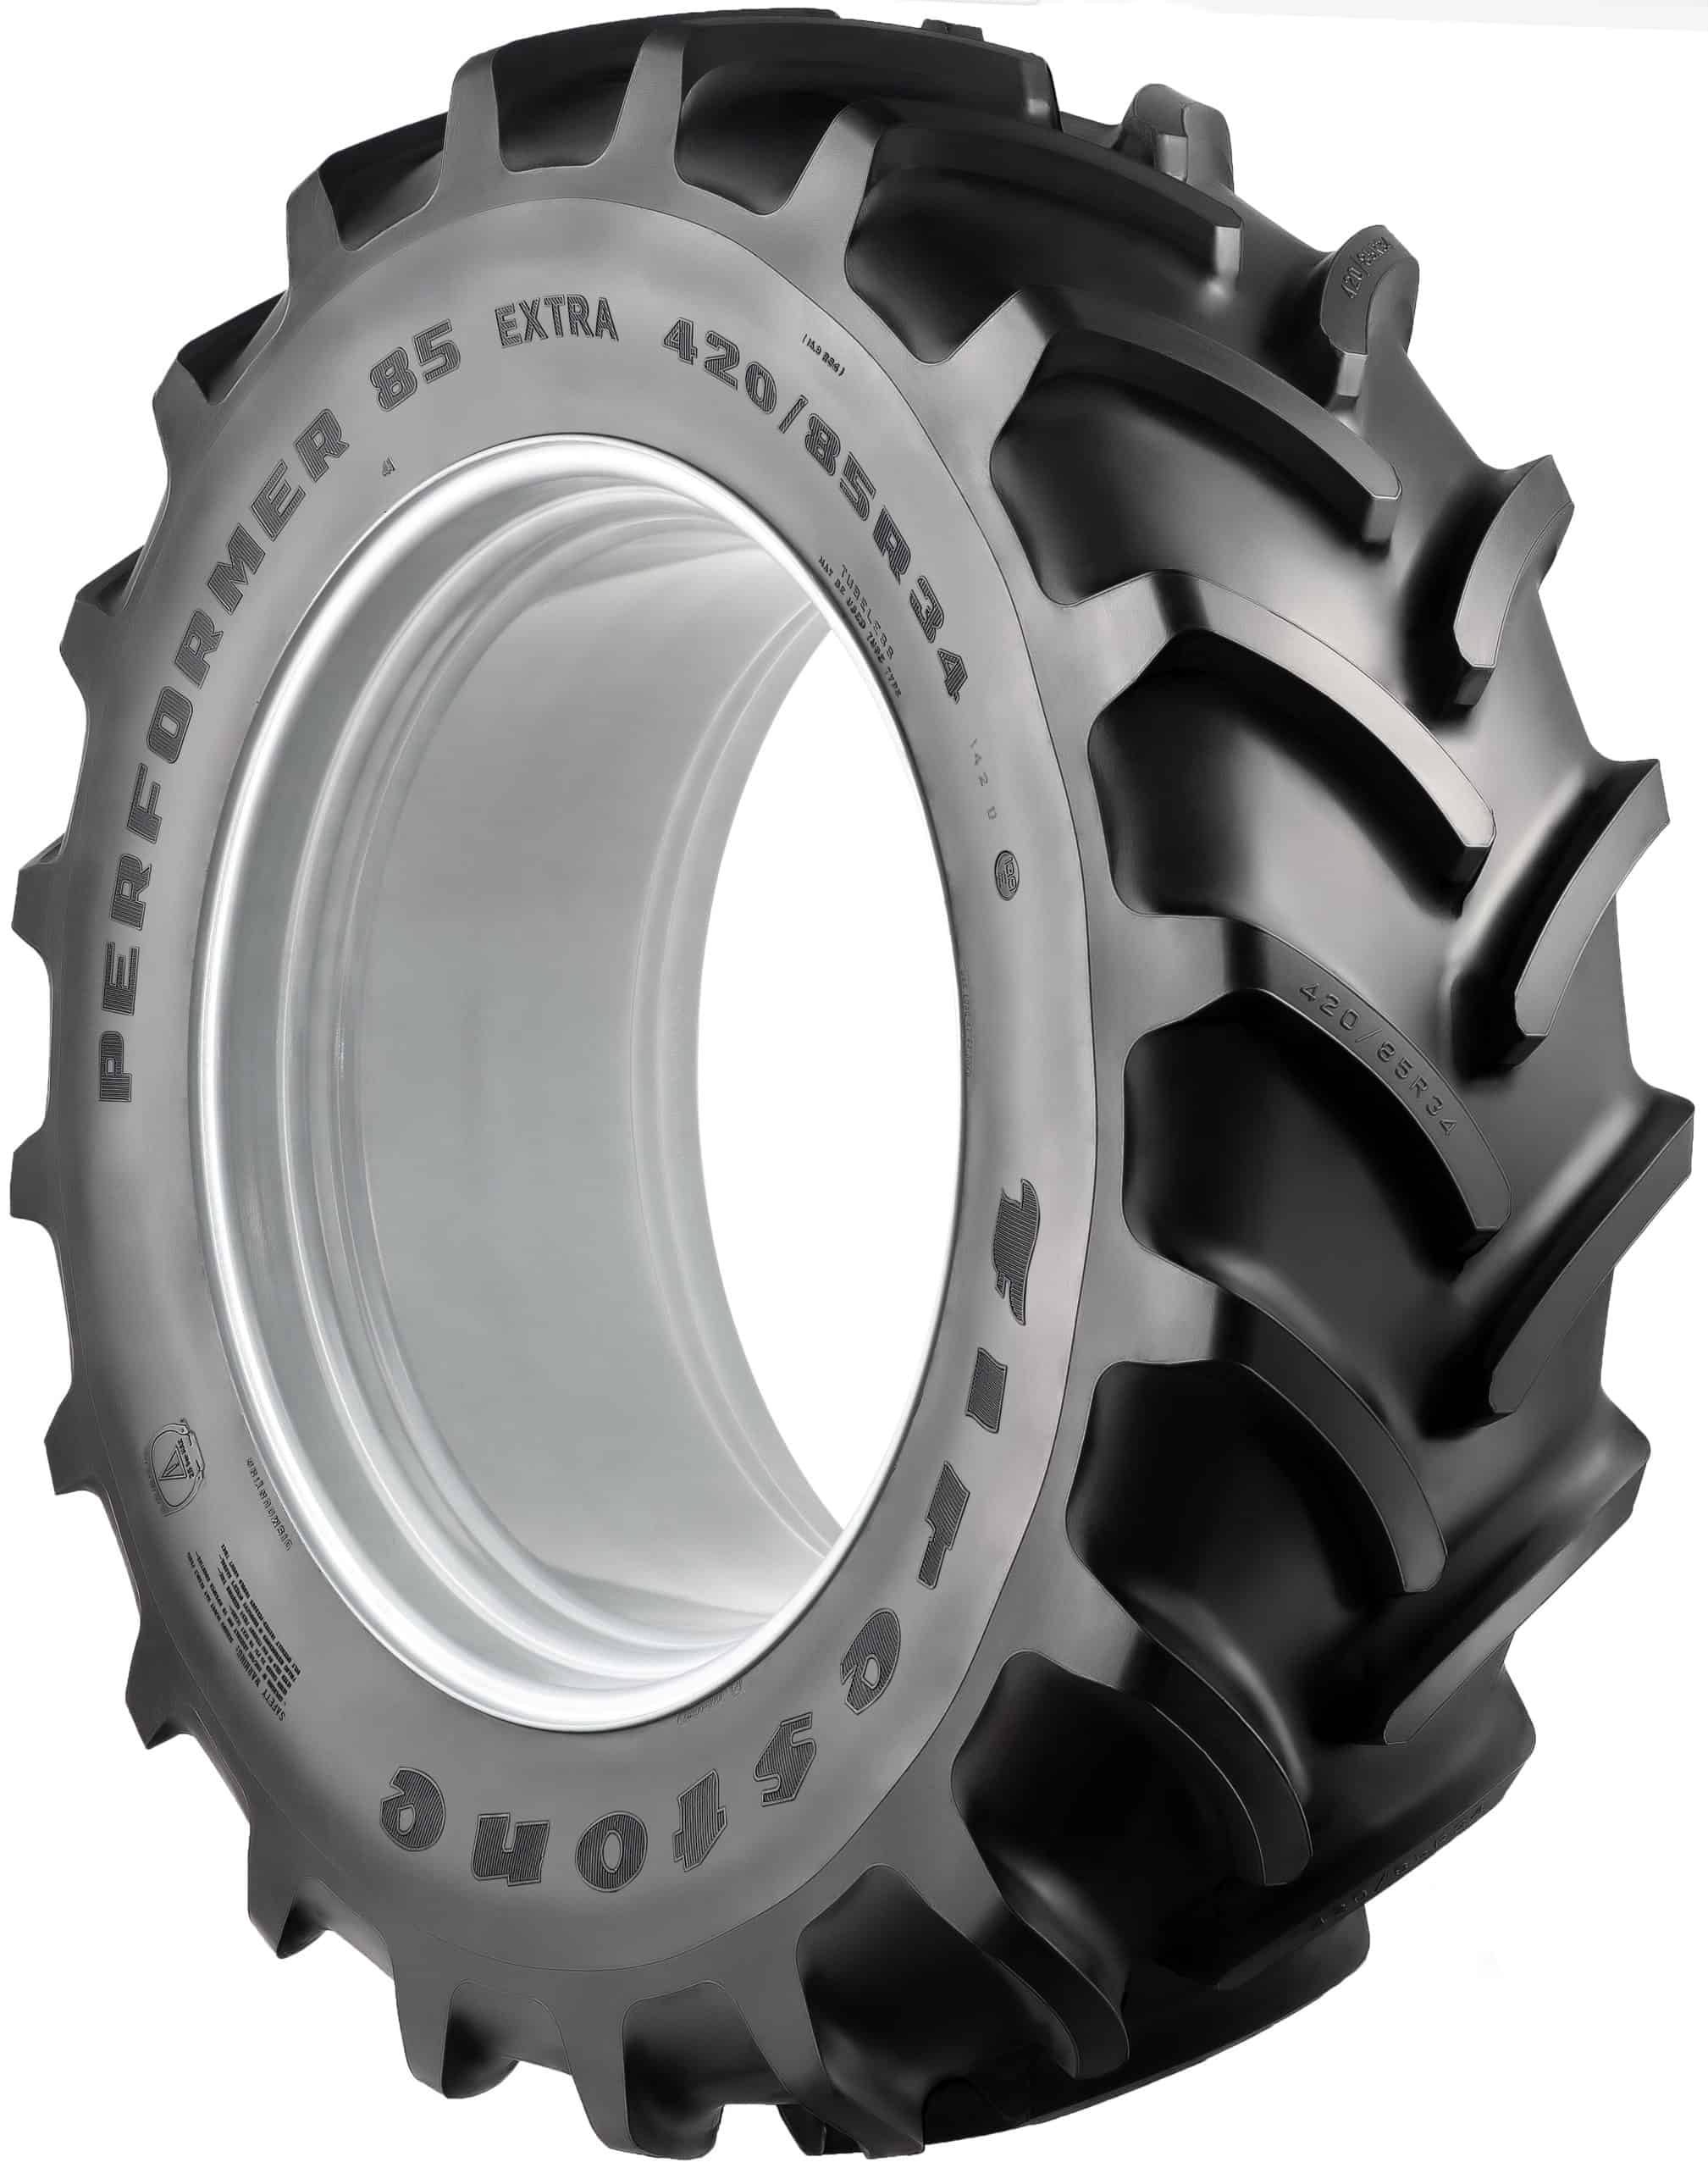 Firestone launches the Performer Extra for 20% longer tyre life